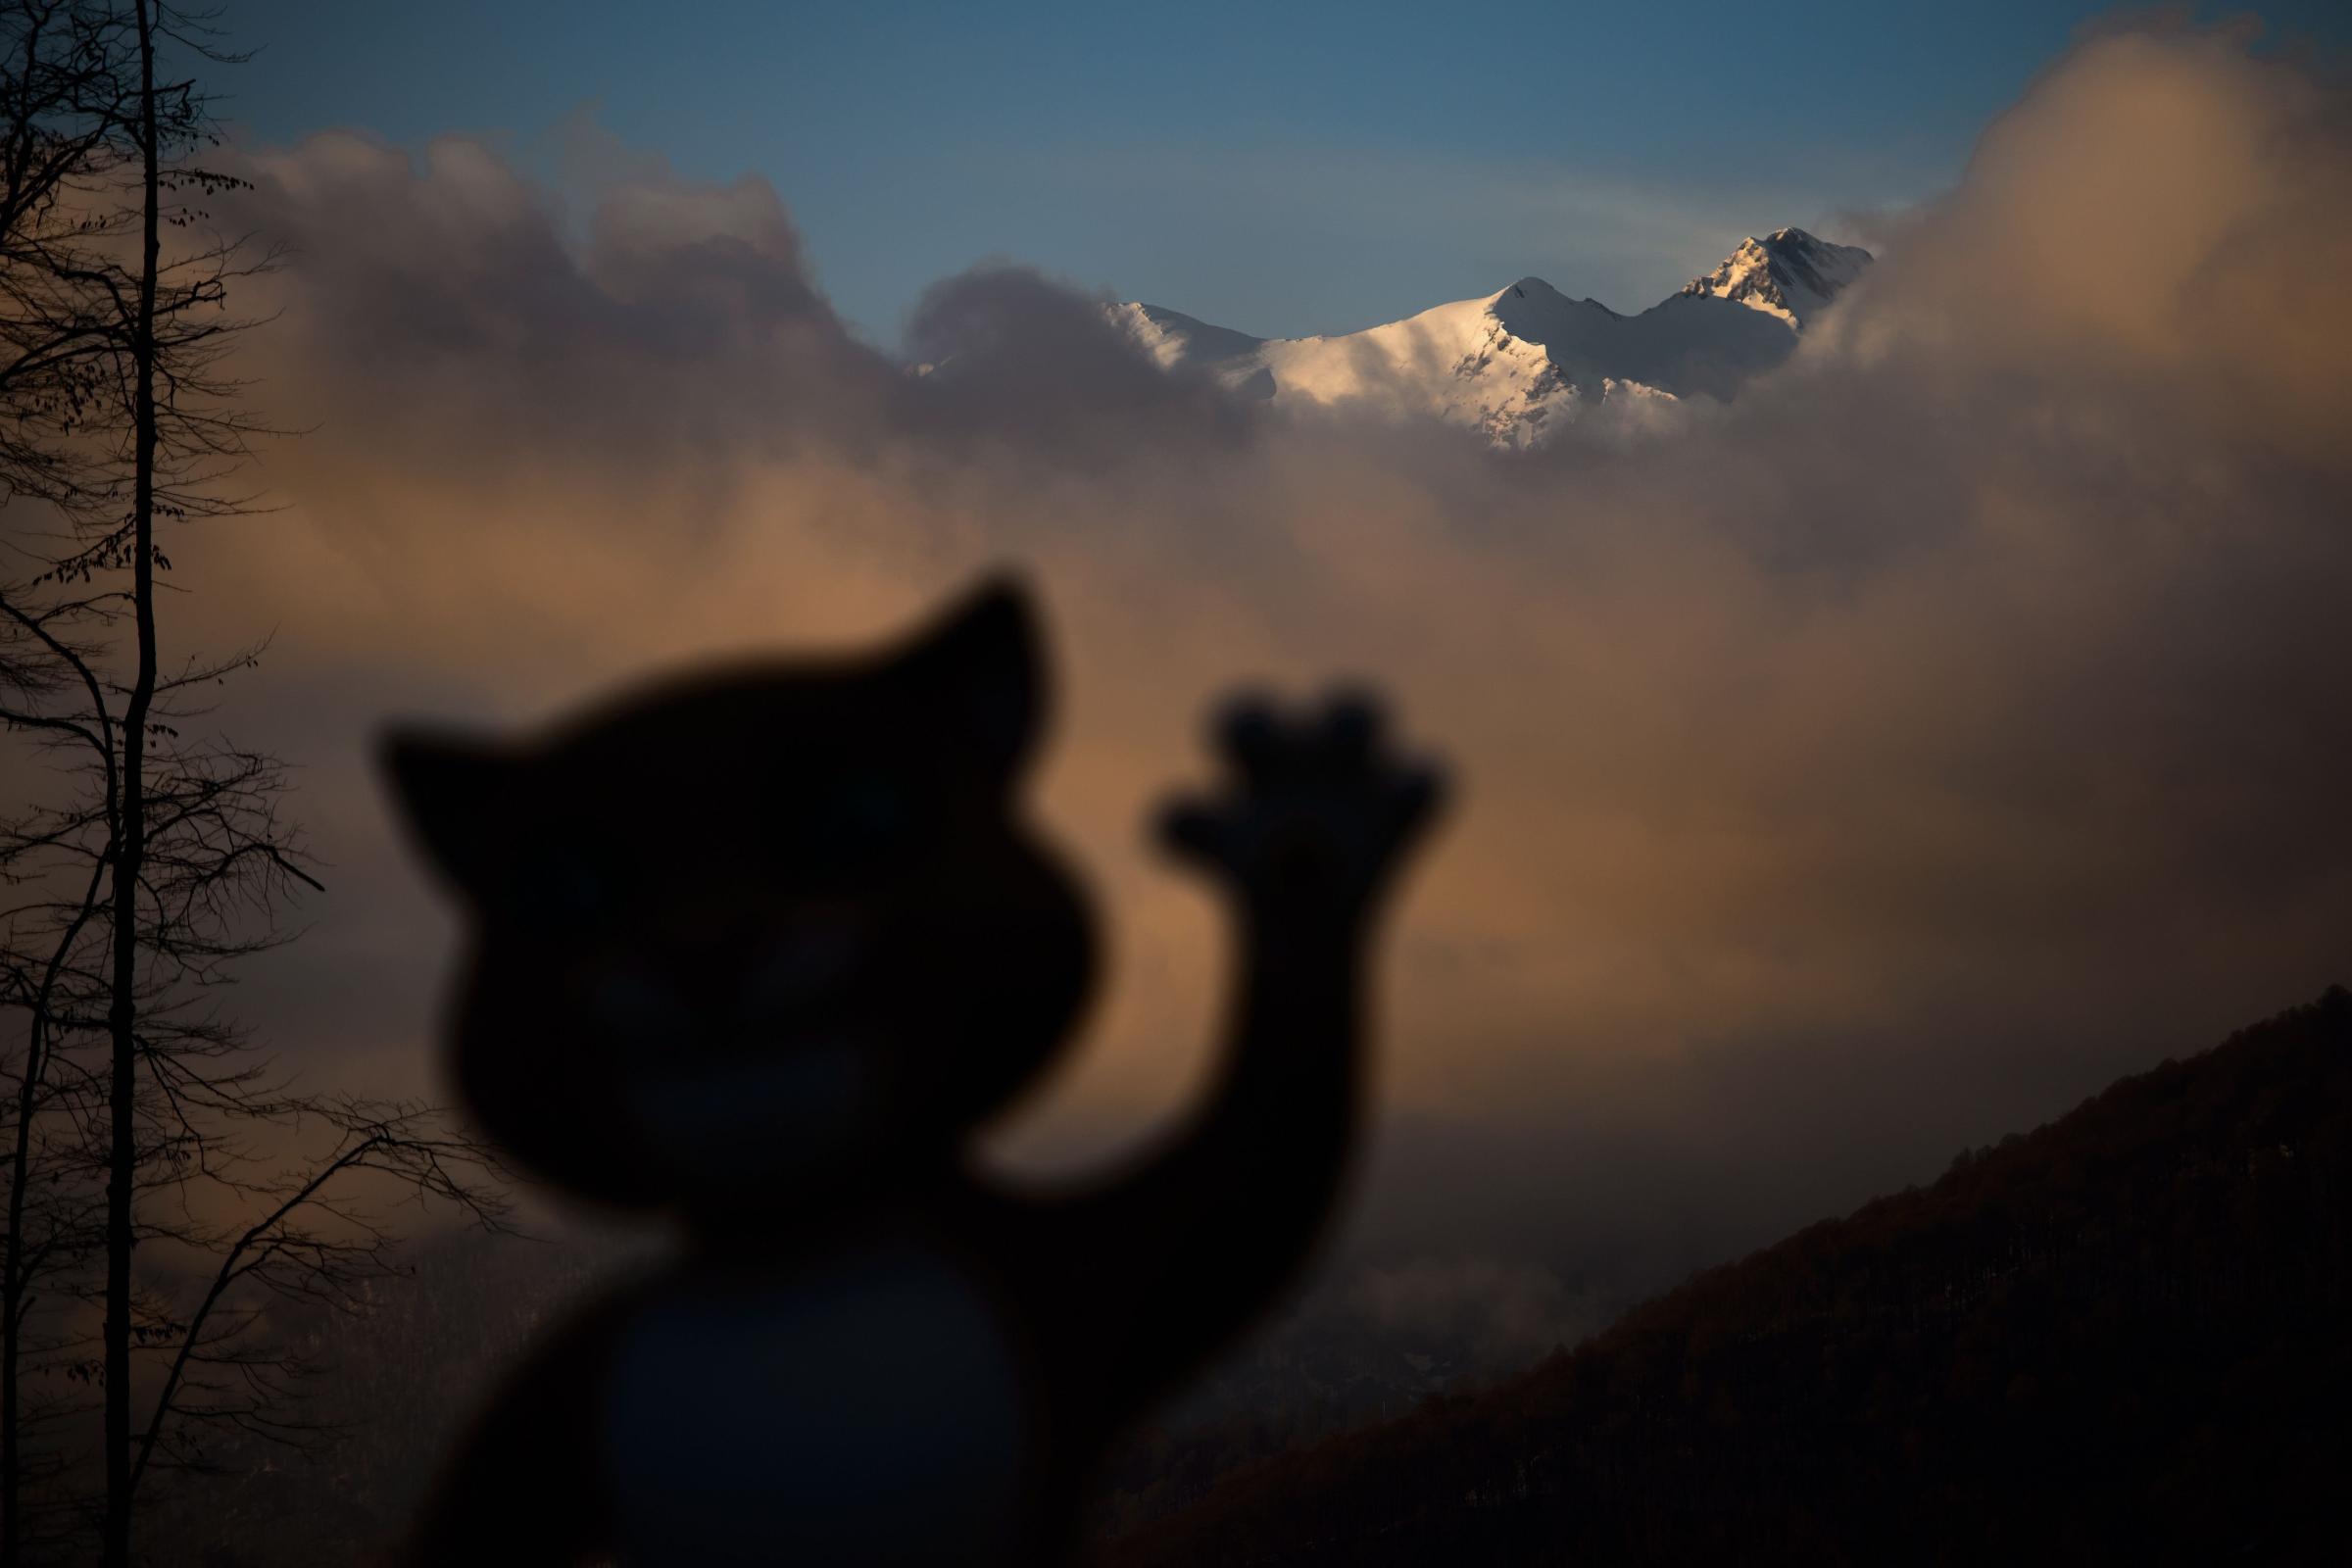 A mascot of Sochi Winter Olympics is seen in silhouette with mountains at sunset at the Mountain athletes village during the Sochi Winter Olympics on Feb.11, 2014.